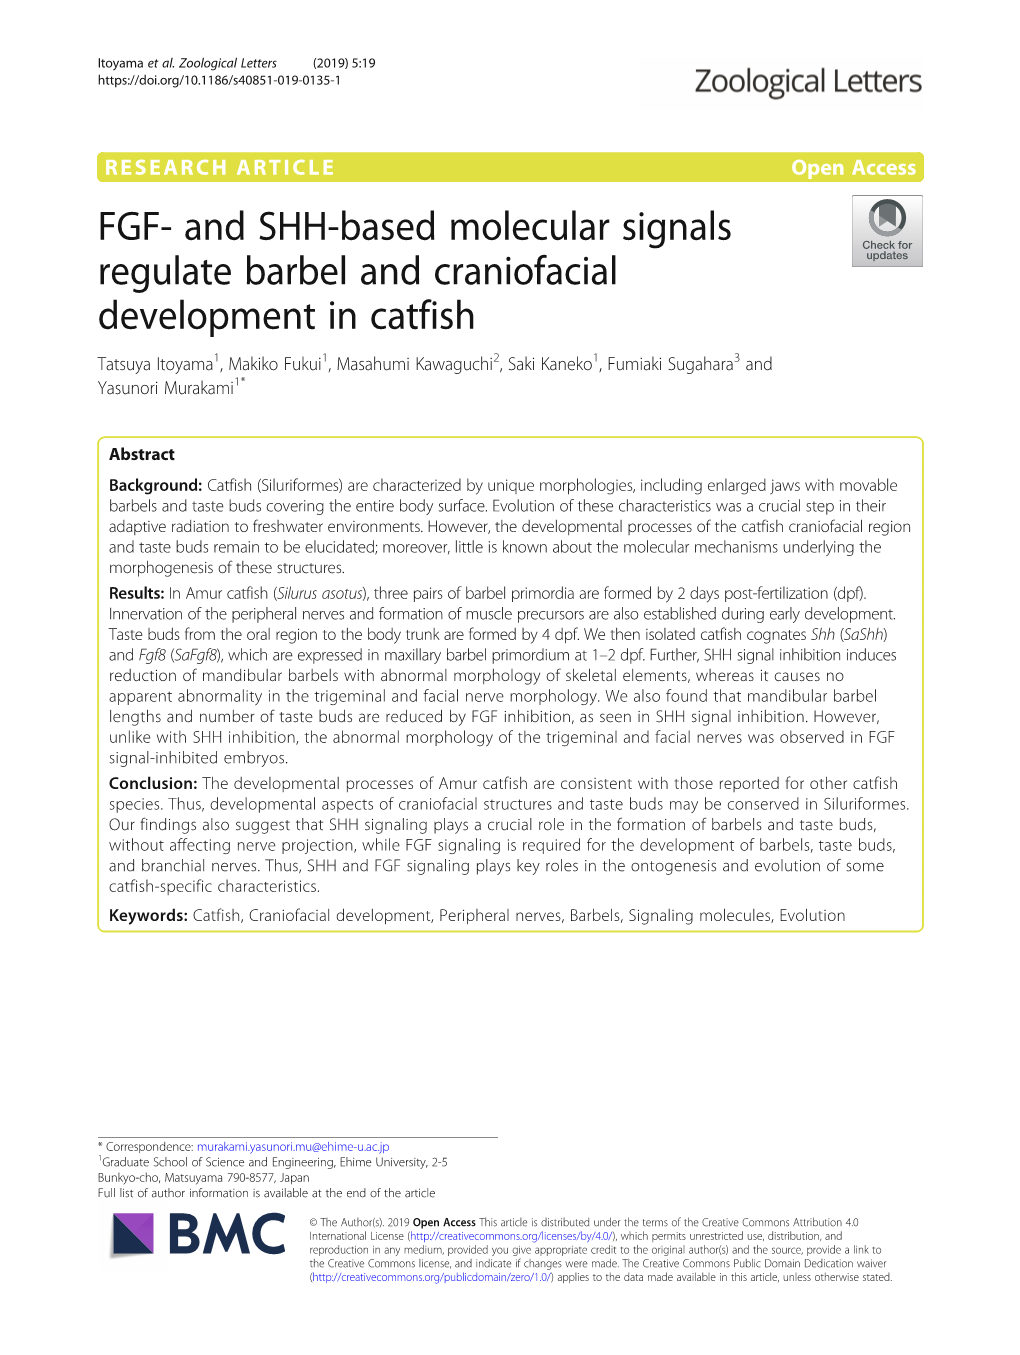 FGF- and SHH-Based Molecular Signals Regulate Barbel And